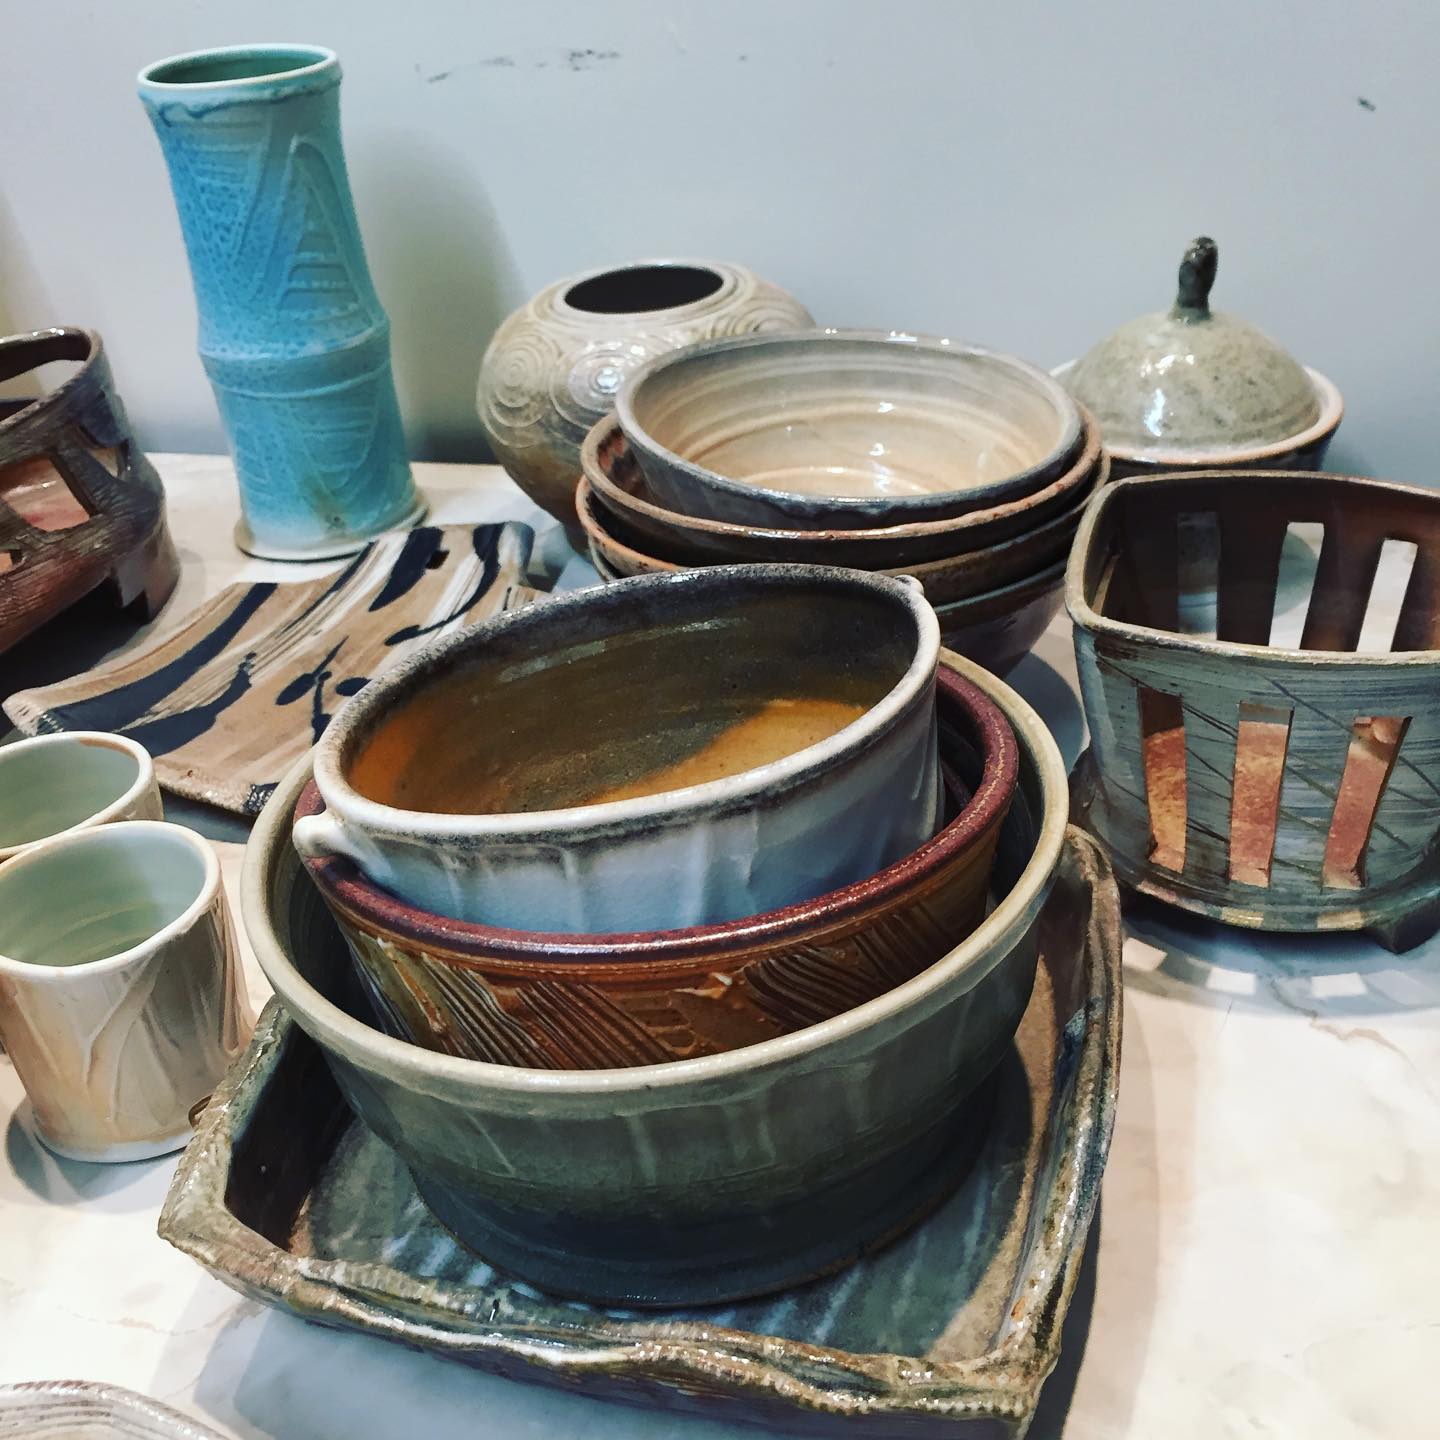 Hand made pottery by the members of Peekskill Clay Studio for sale at the Nearly Perfect Pottery Sale